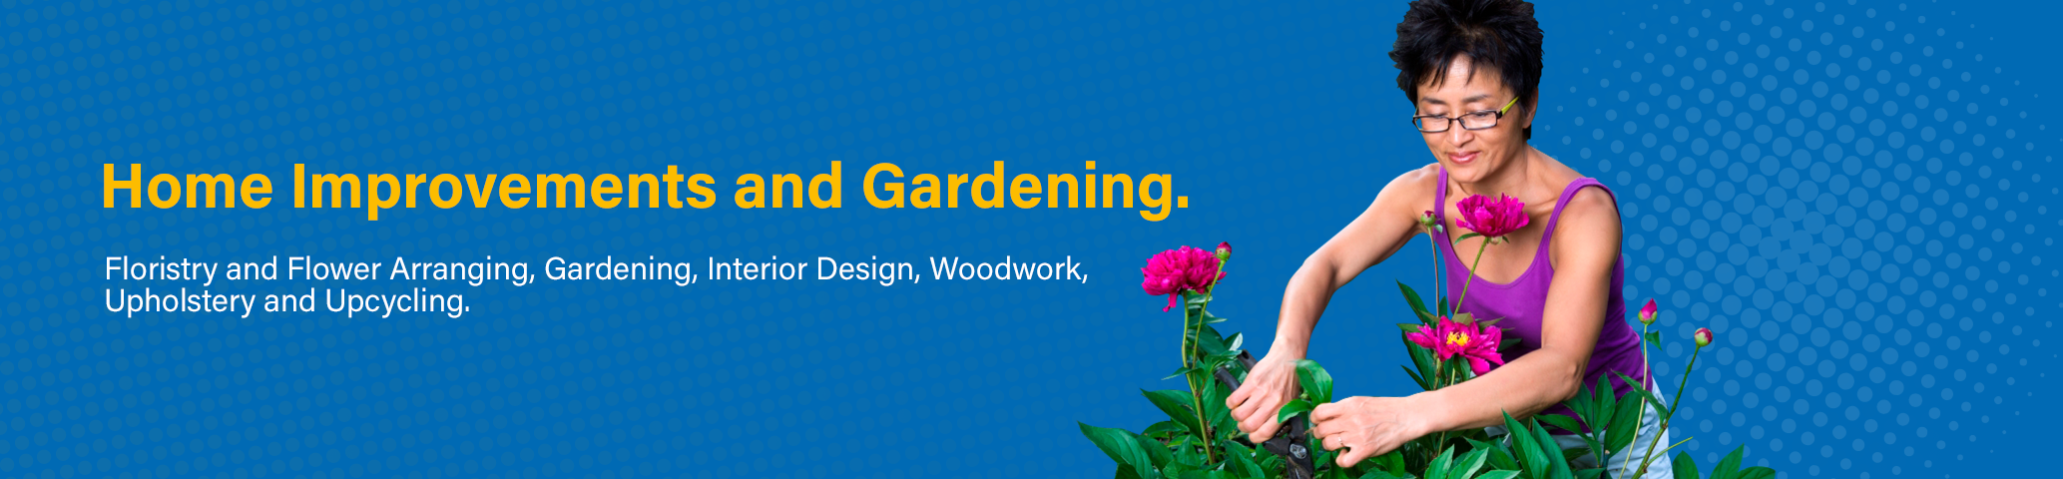 Banner promoting courses in Home Improvements and Gardening including Floristry, flower arranging, Gardening, Interior Design, Woodwork, Upholstery and Upcycling.